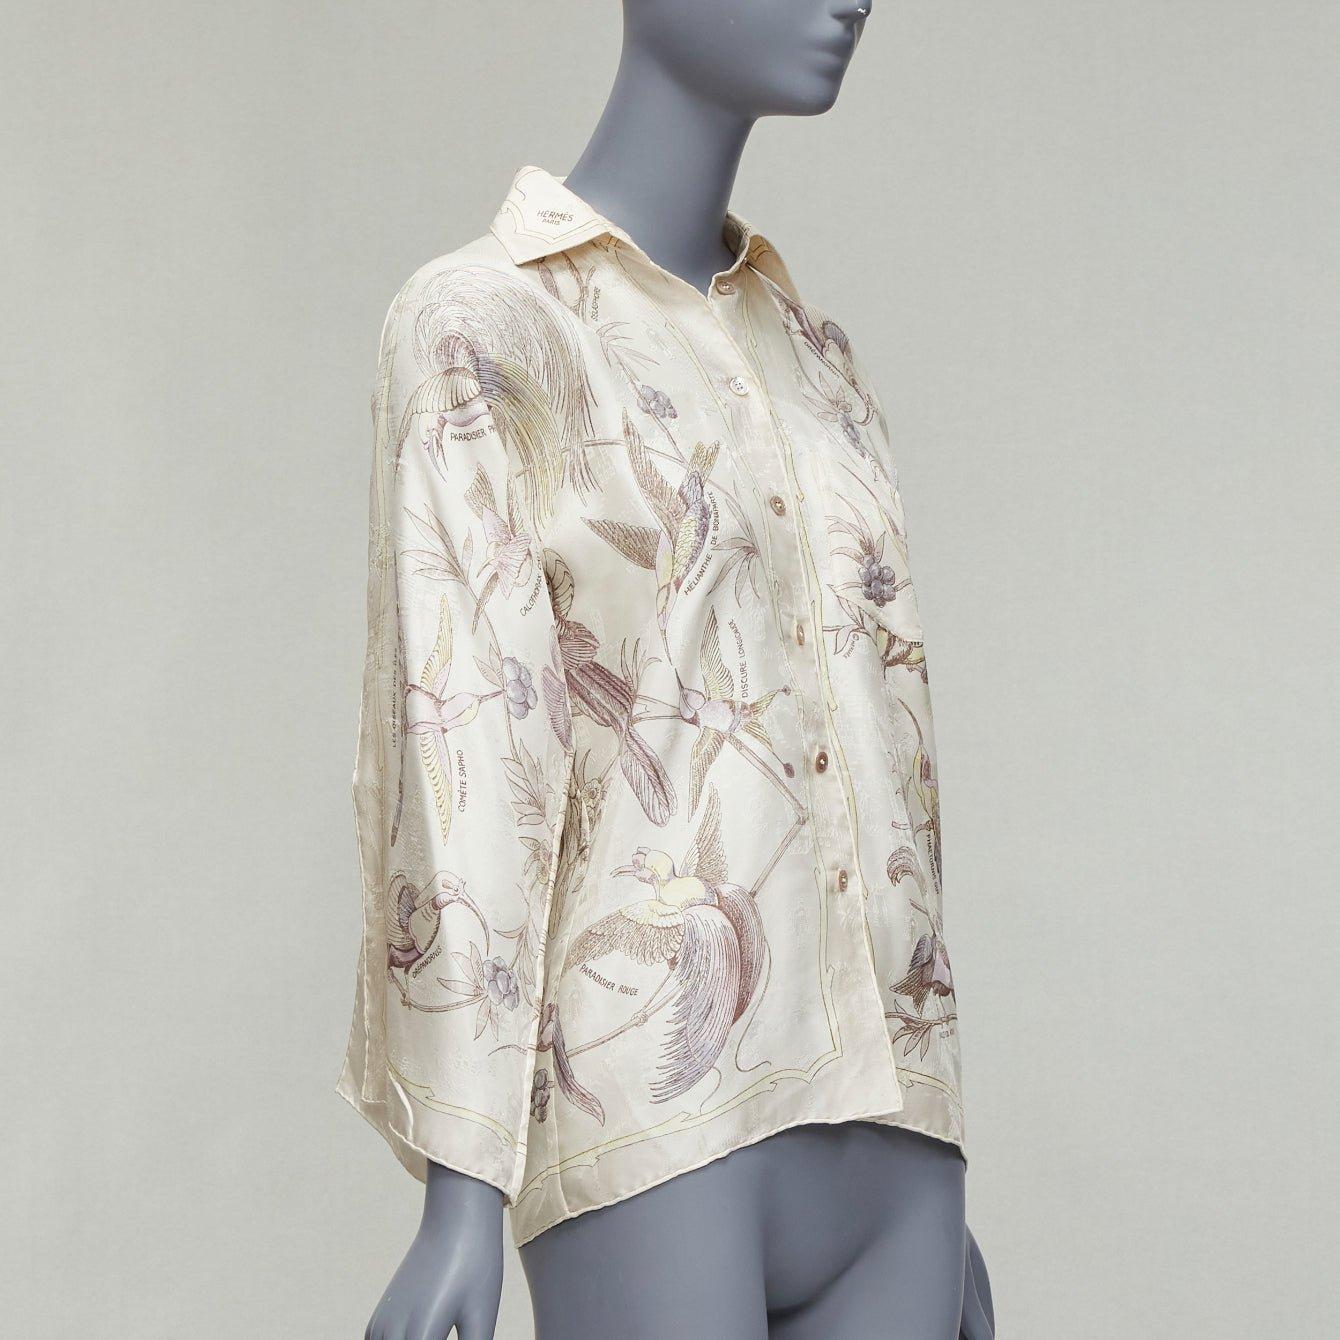 HERMES Vintage 100% silk cream bird print scarf slit sleeve kimono shirt FR34 XS
Reference: TGAS/D00878
Brand: Hermes
Material: Silk
Color: Cream
Pattern: Animal Print
Closure: Button
Extra Details: Logo buttons.
Made in: